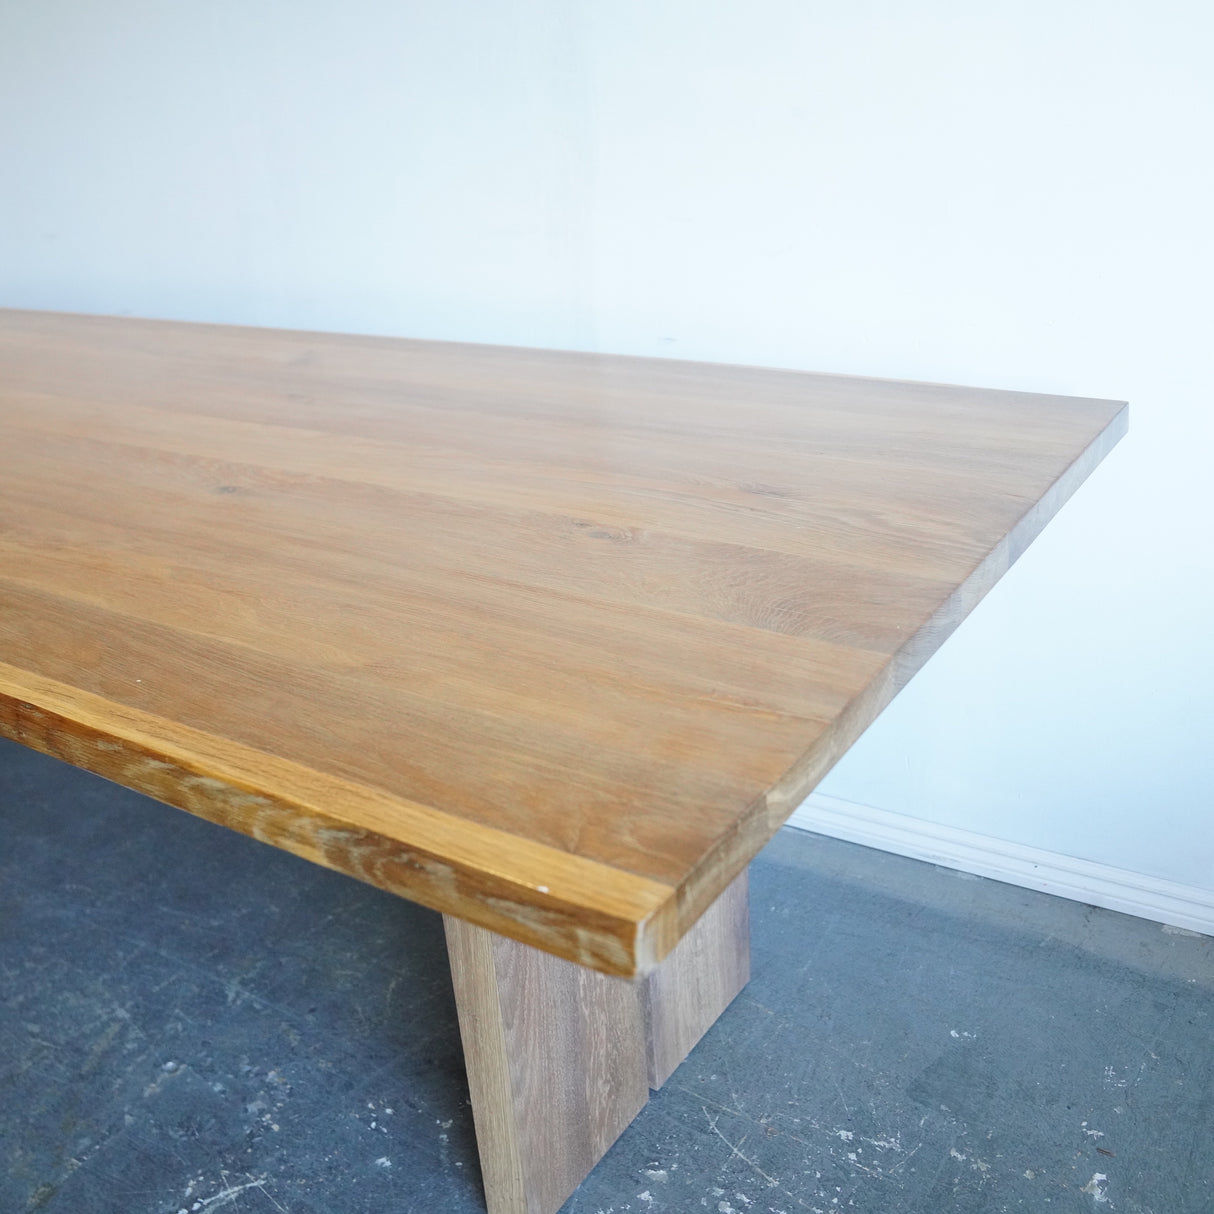 Crate and Barrel Monarch 92" Live edge wood Dining Table